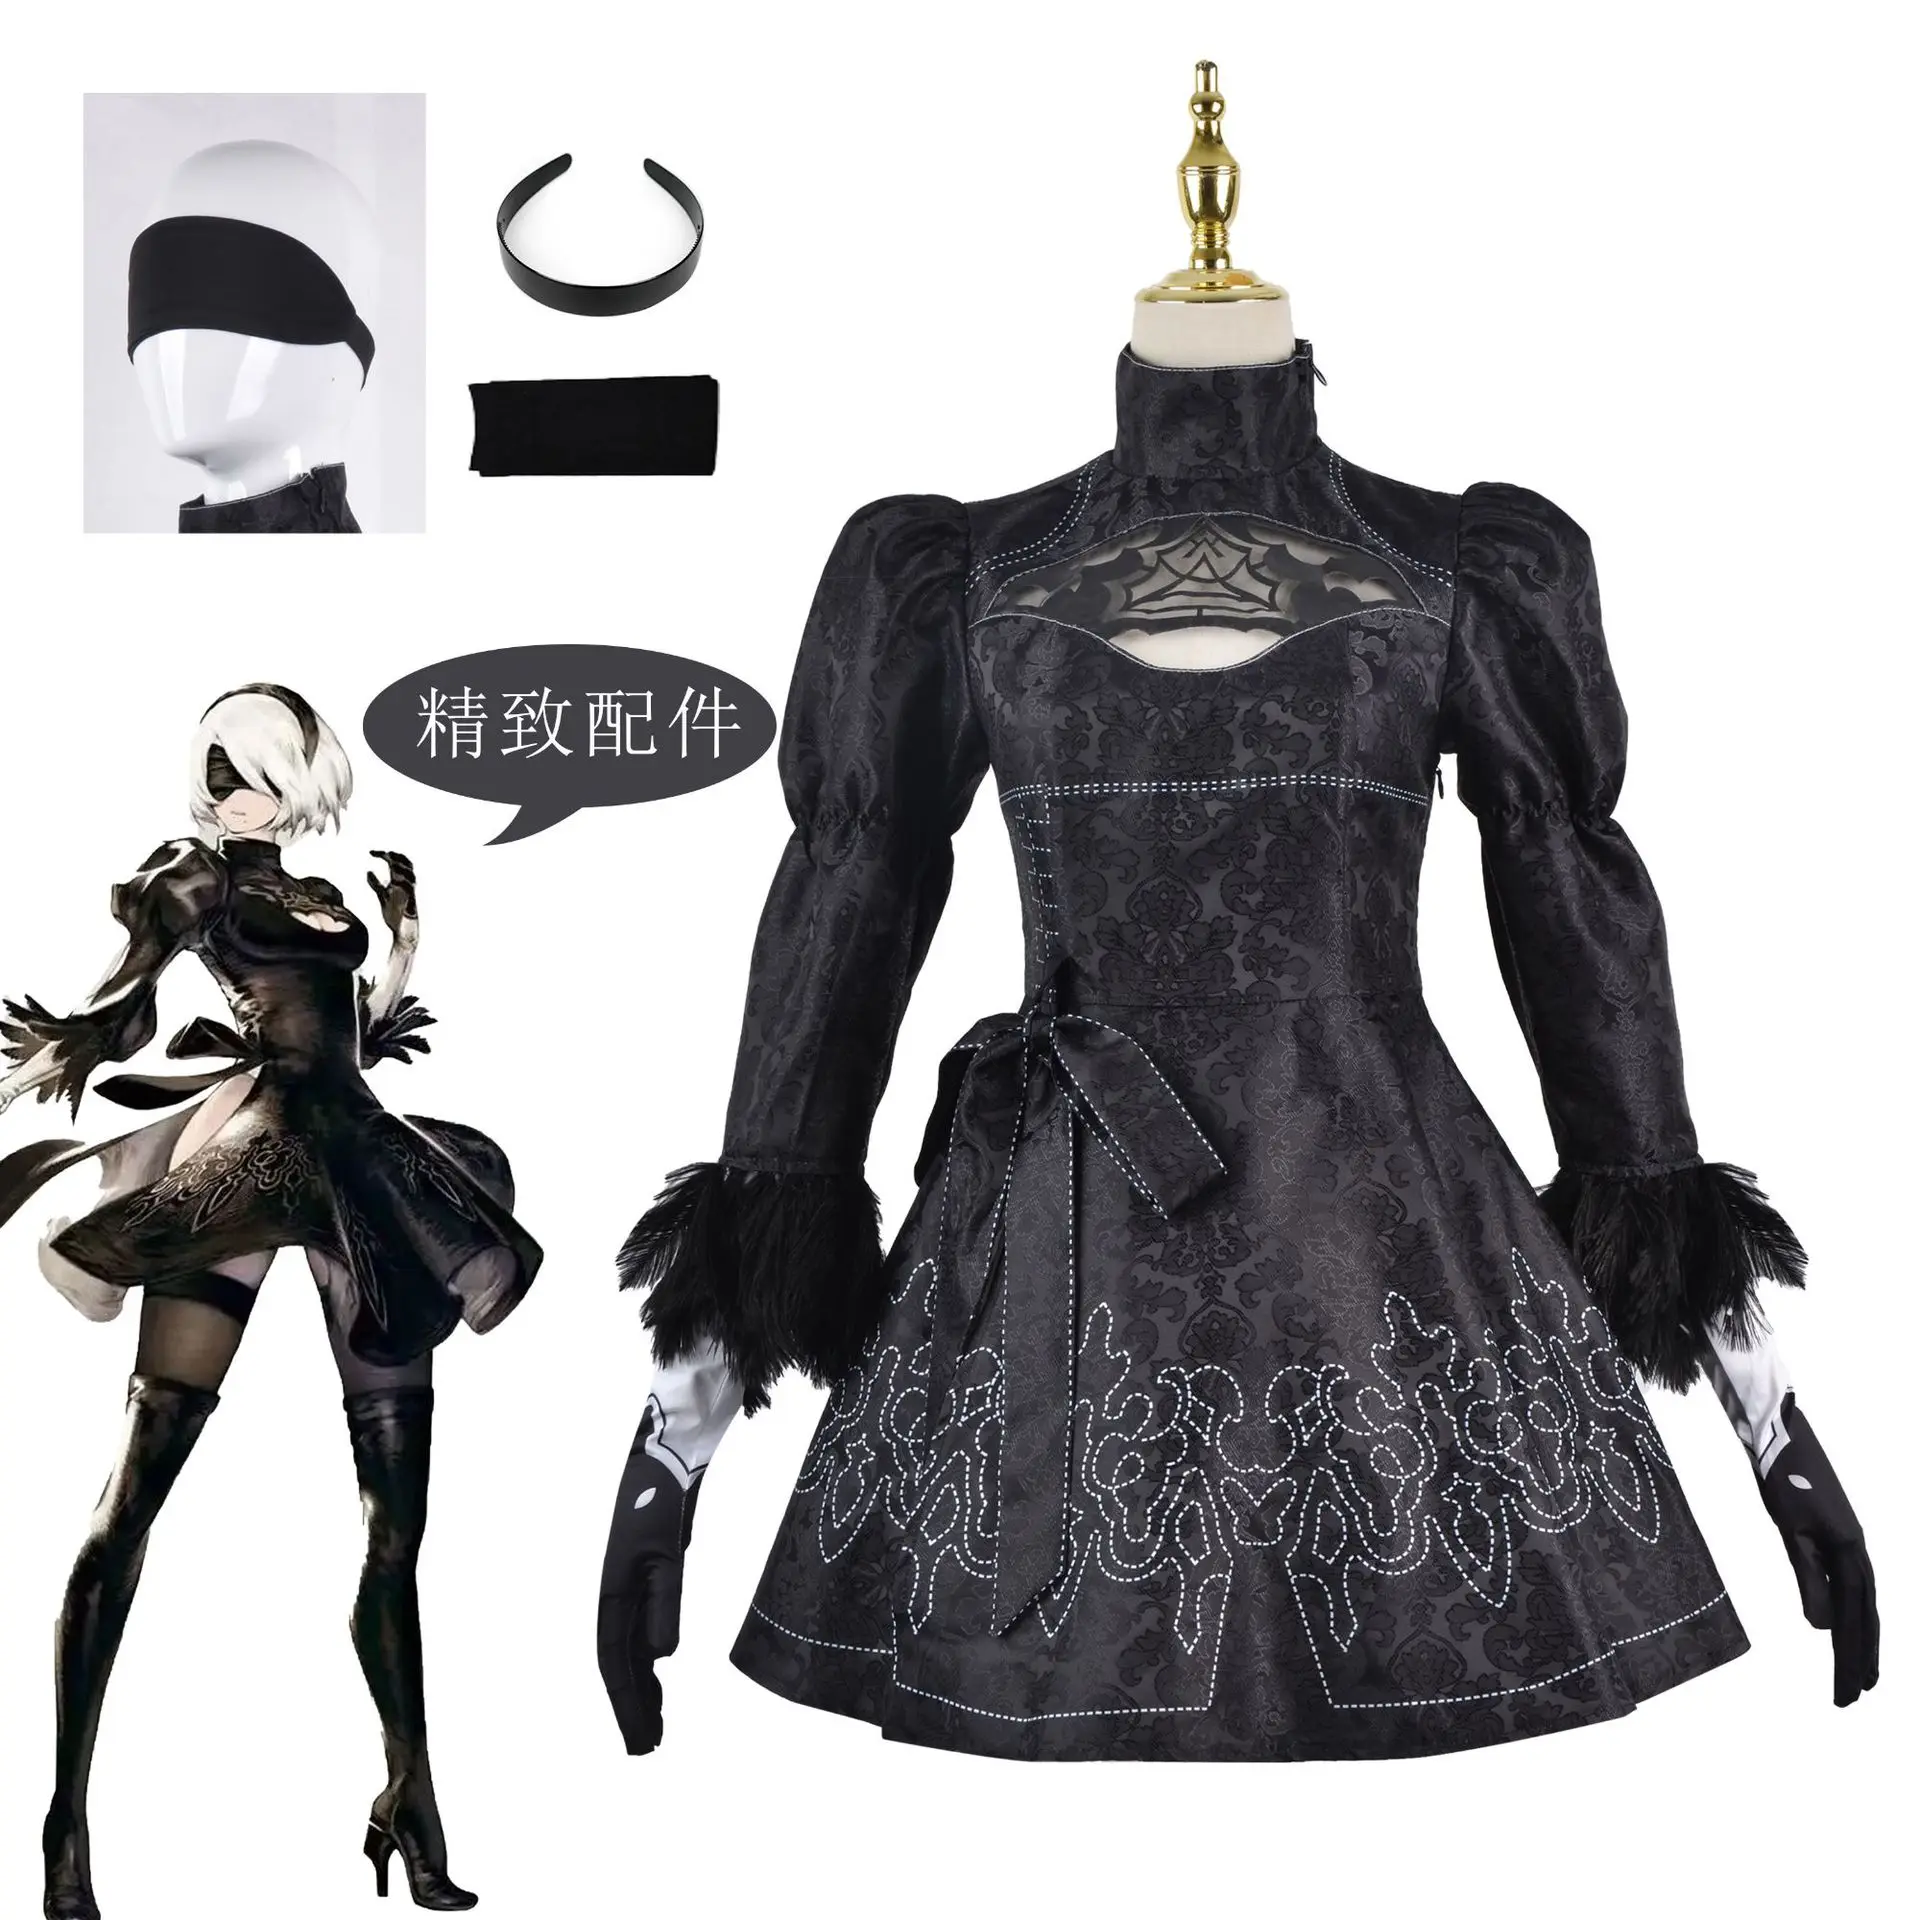 

Games Men Role Play Costumes Nier Automata Cosplay Costume Yorha 9S No.9 Type S Outfit Suit Halloween Party Fancy